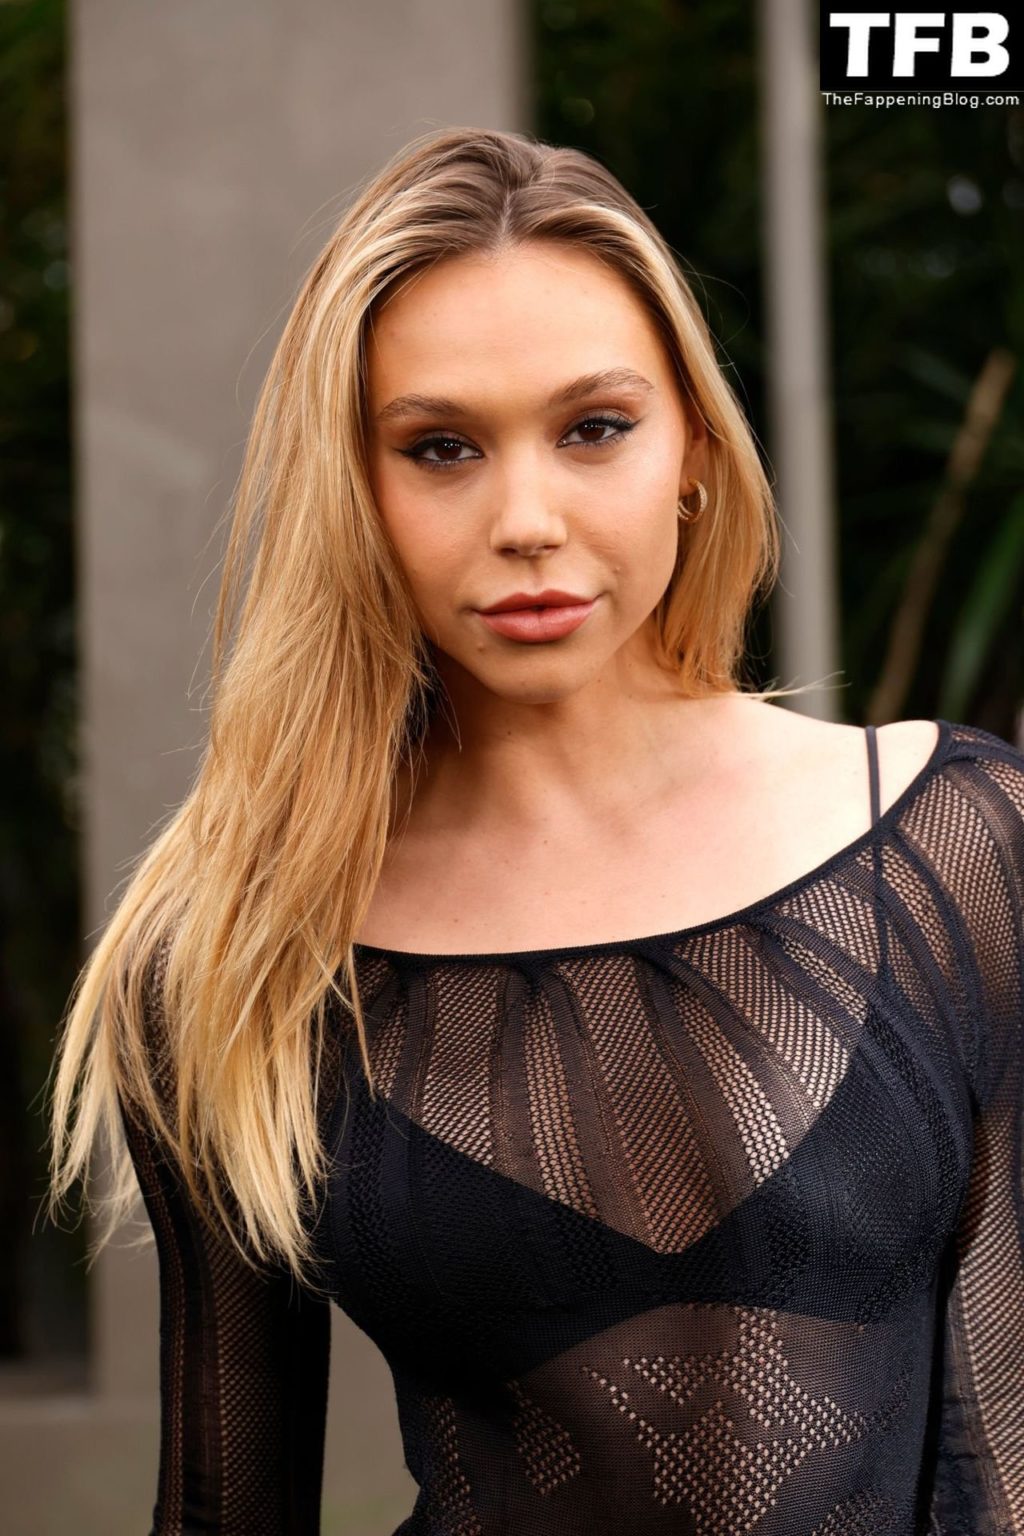 Alexis Ren Sexy The Fappening Blog 2 1024x1536 - Alexis Ren Displays Her Slender Figure in a See-Through Dress at the “Jurassic World: Dominion” Premiere (41 Photos)